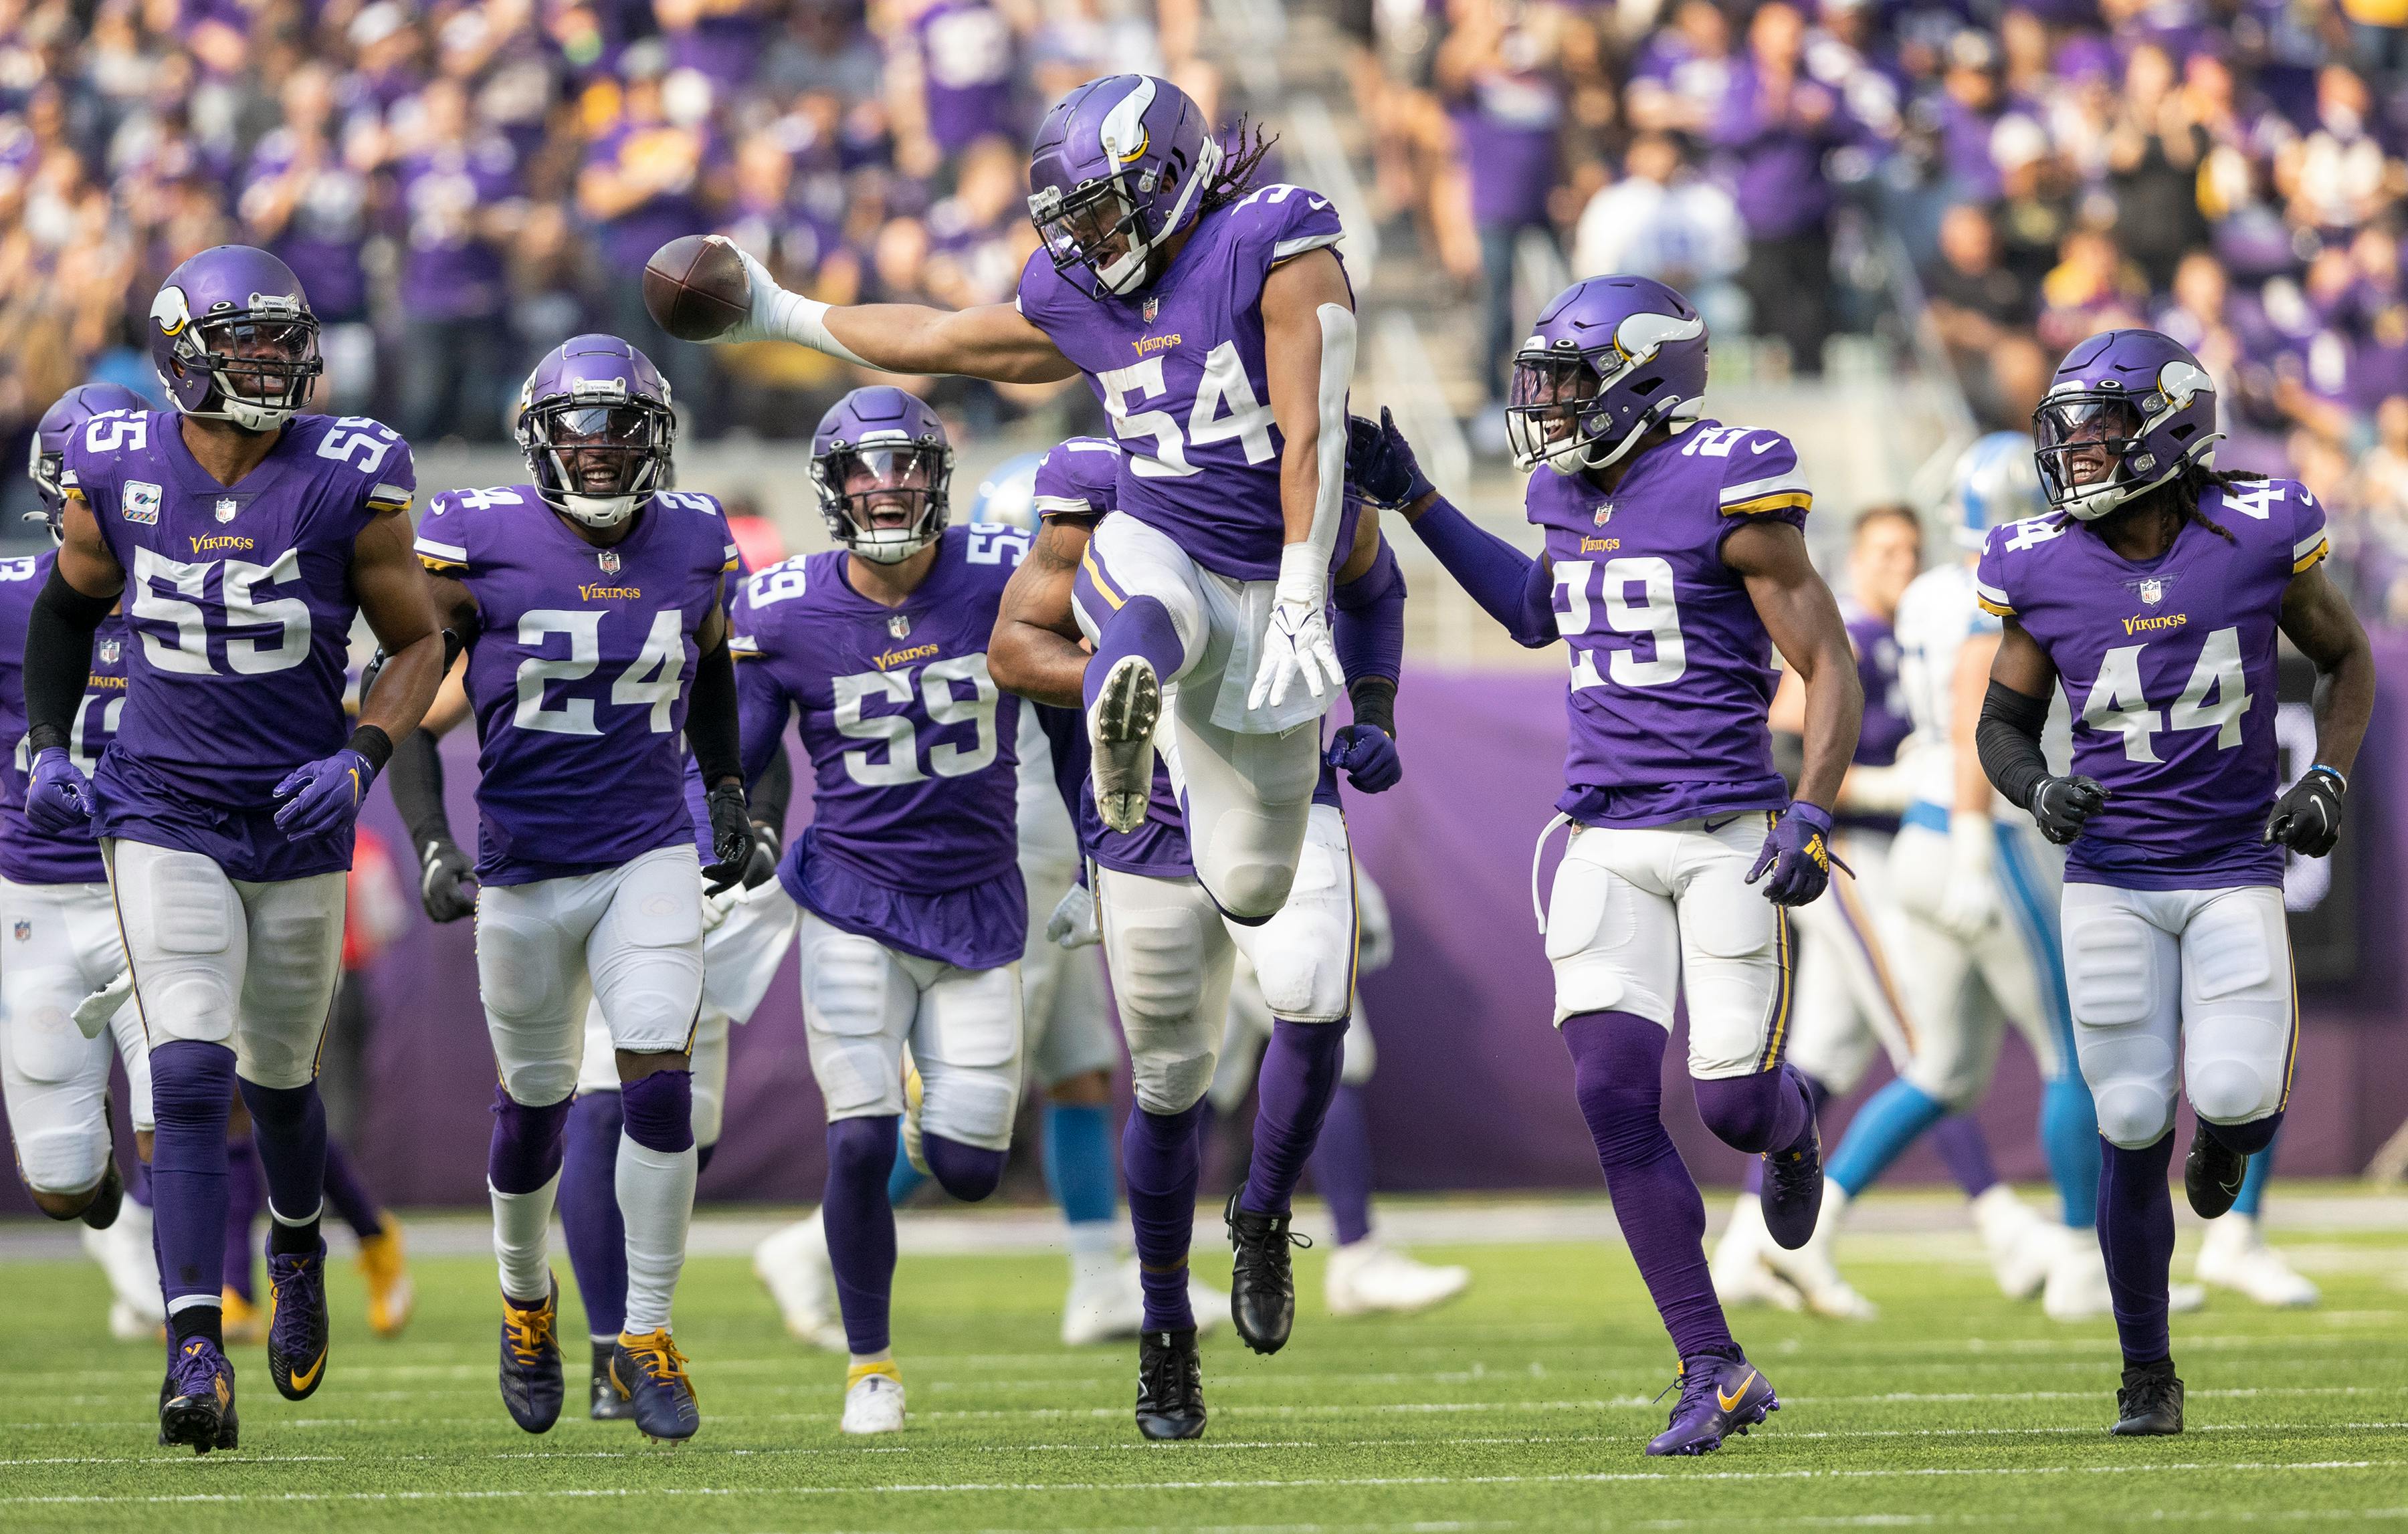 Five extra points: Play calls, penalties and run defense hamper the Vikings